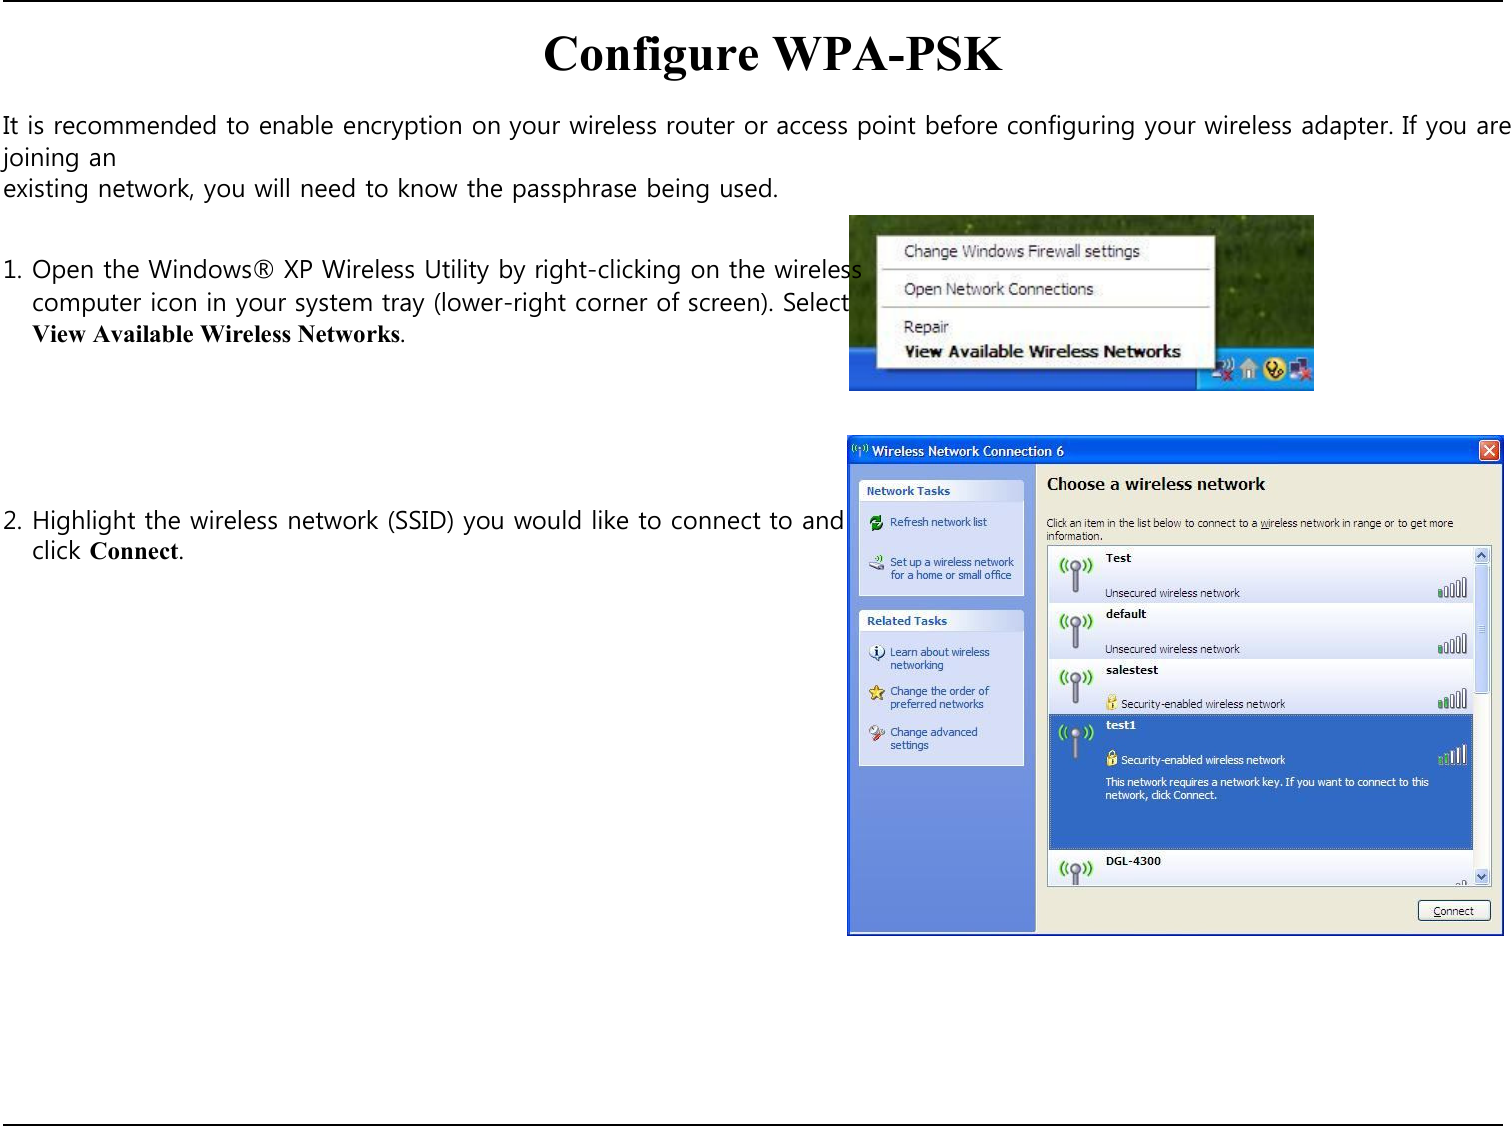   Configure WPA-PSK  It is recommended to enable encryption on your wireless router or access point before configuring your wireless adapter. If you are joining an existing network, you will need to know the passphrase being used.   1. Open the Windows® XP Wireless Utility by right-clicking on the wireless computer icon in your system tray (lower-right corner of screen). Select View Available Wireless Networks.        2. Highlight the wireless network (SSID) you would like to connect to and click Connect.                             